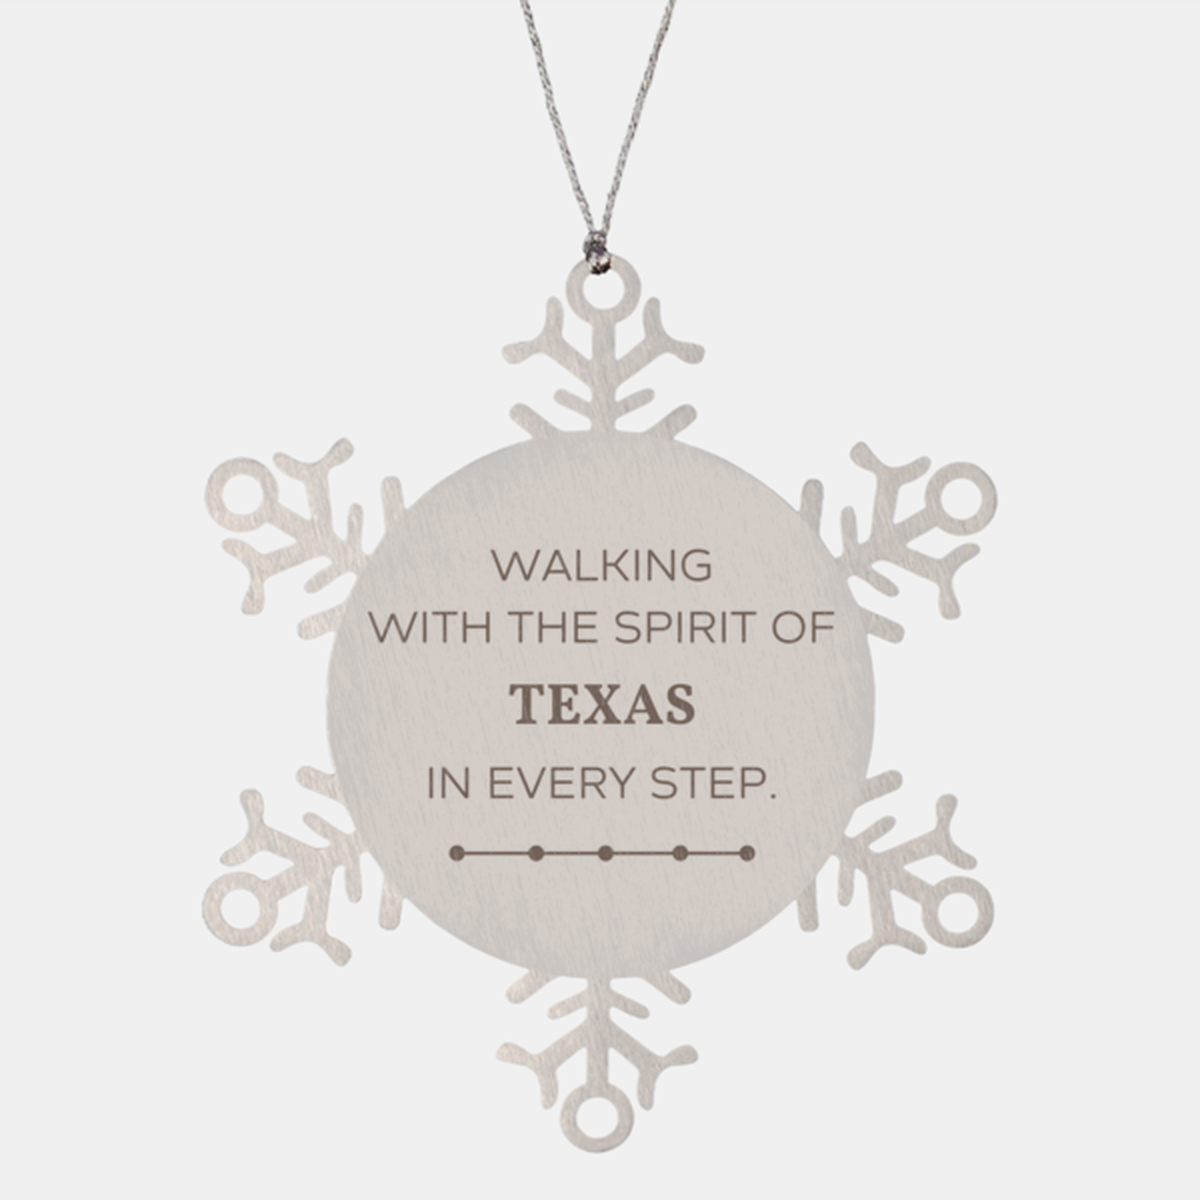 Texas Gifts, Walking with the spirit, Love Texas Birthday Christmas Snowflake Ornament For Texas People, Men, Women, Friends